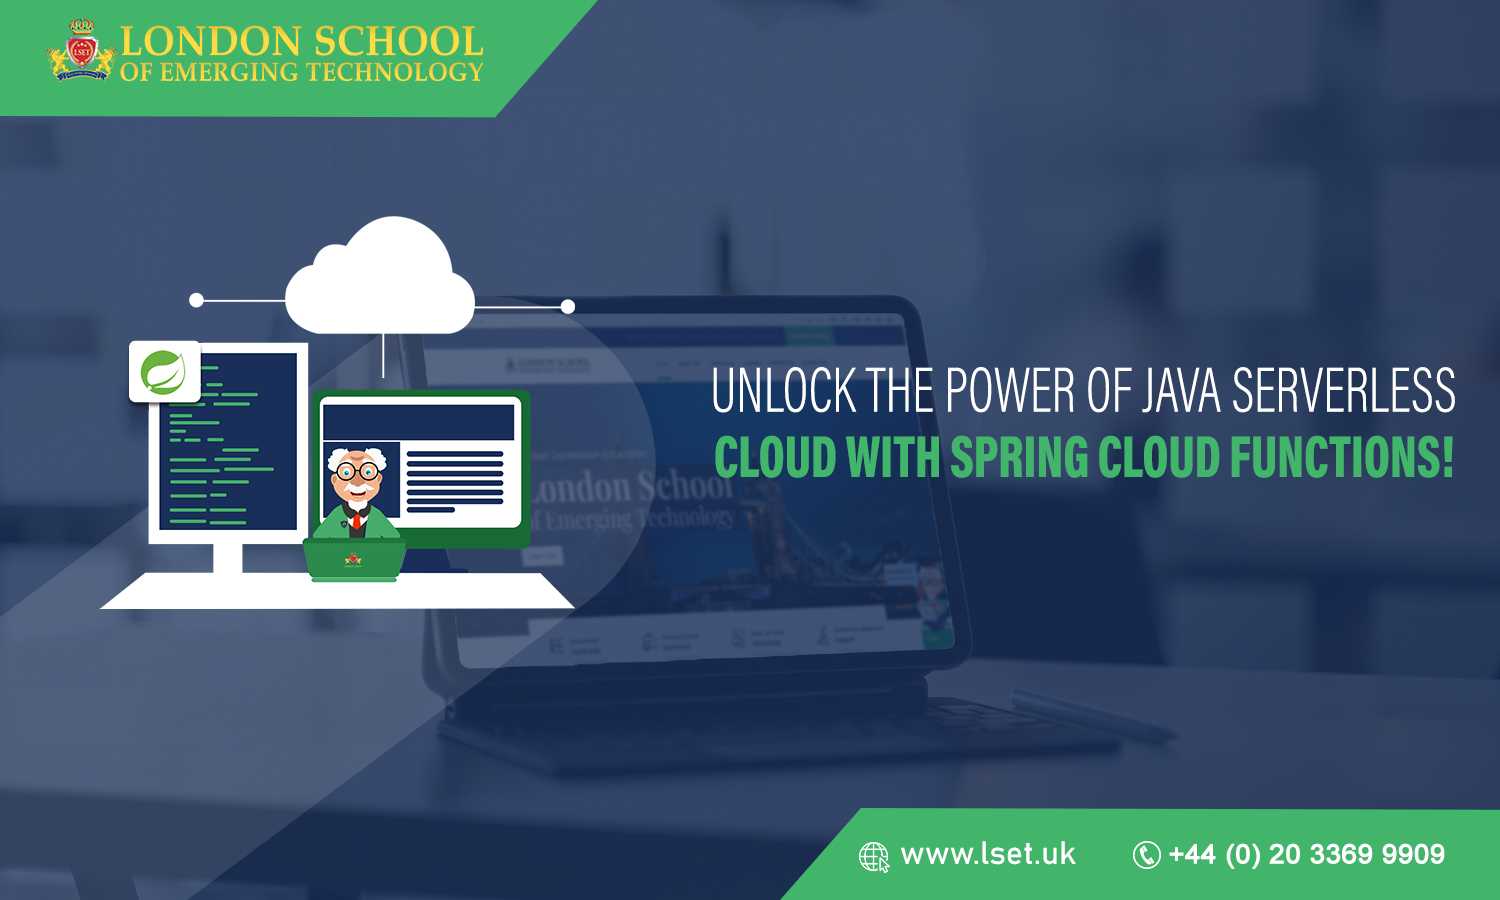 Unlock the Power of Java Serverless Cloud with Spring Cloud Functions!